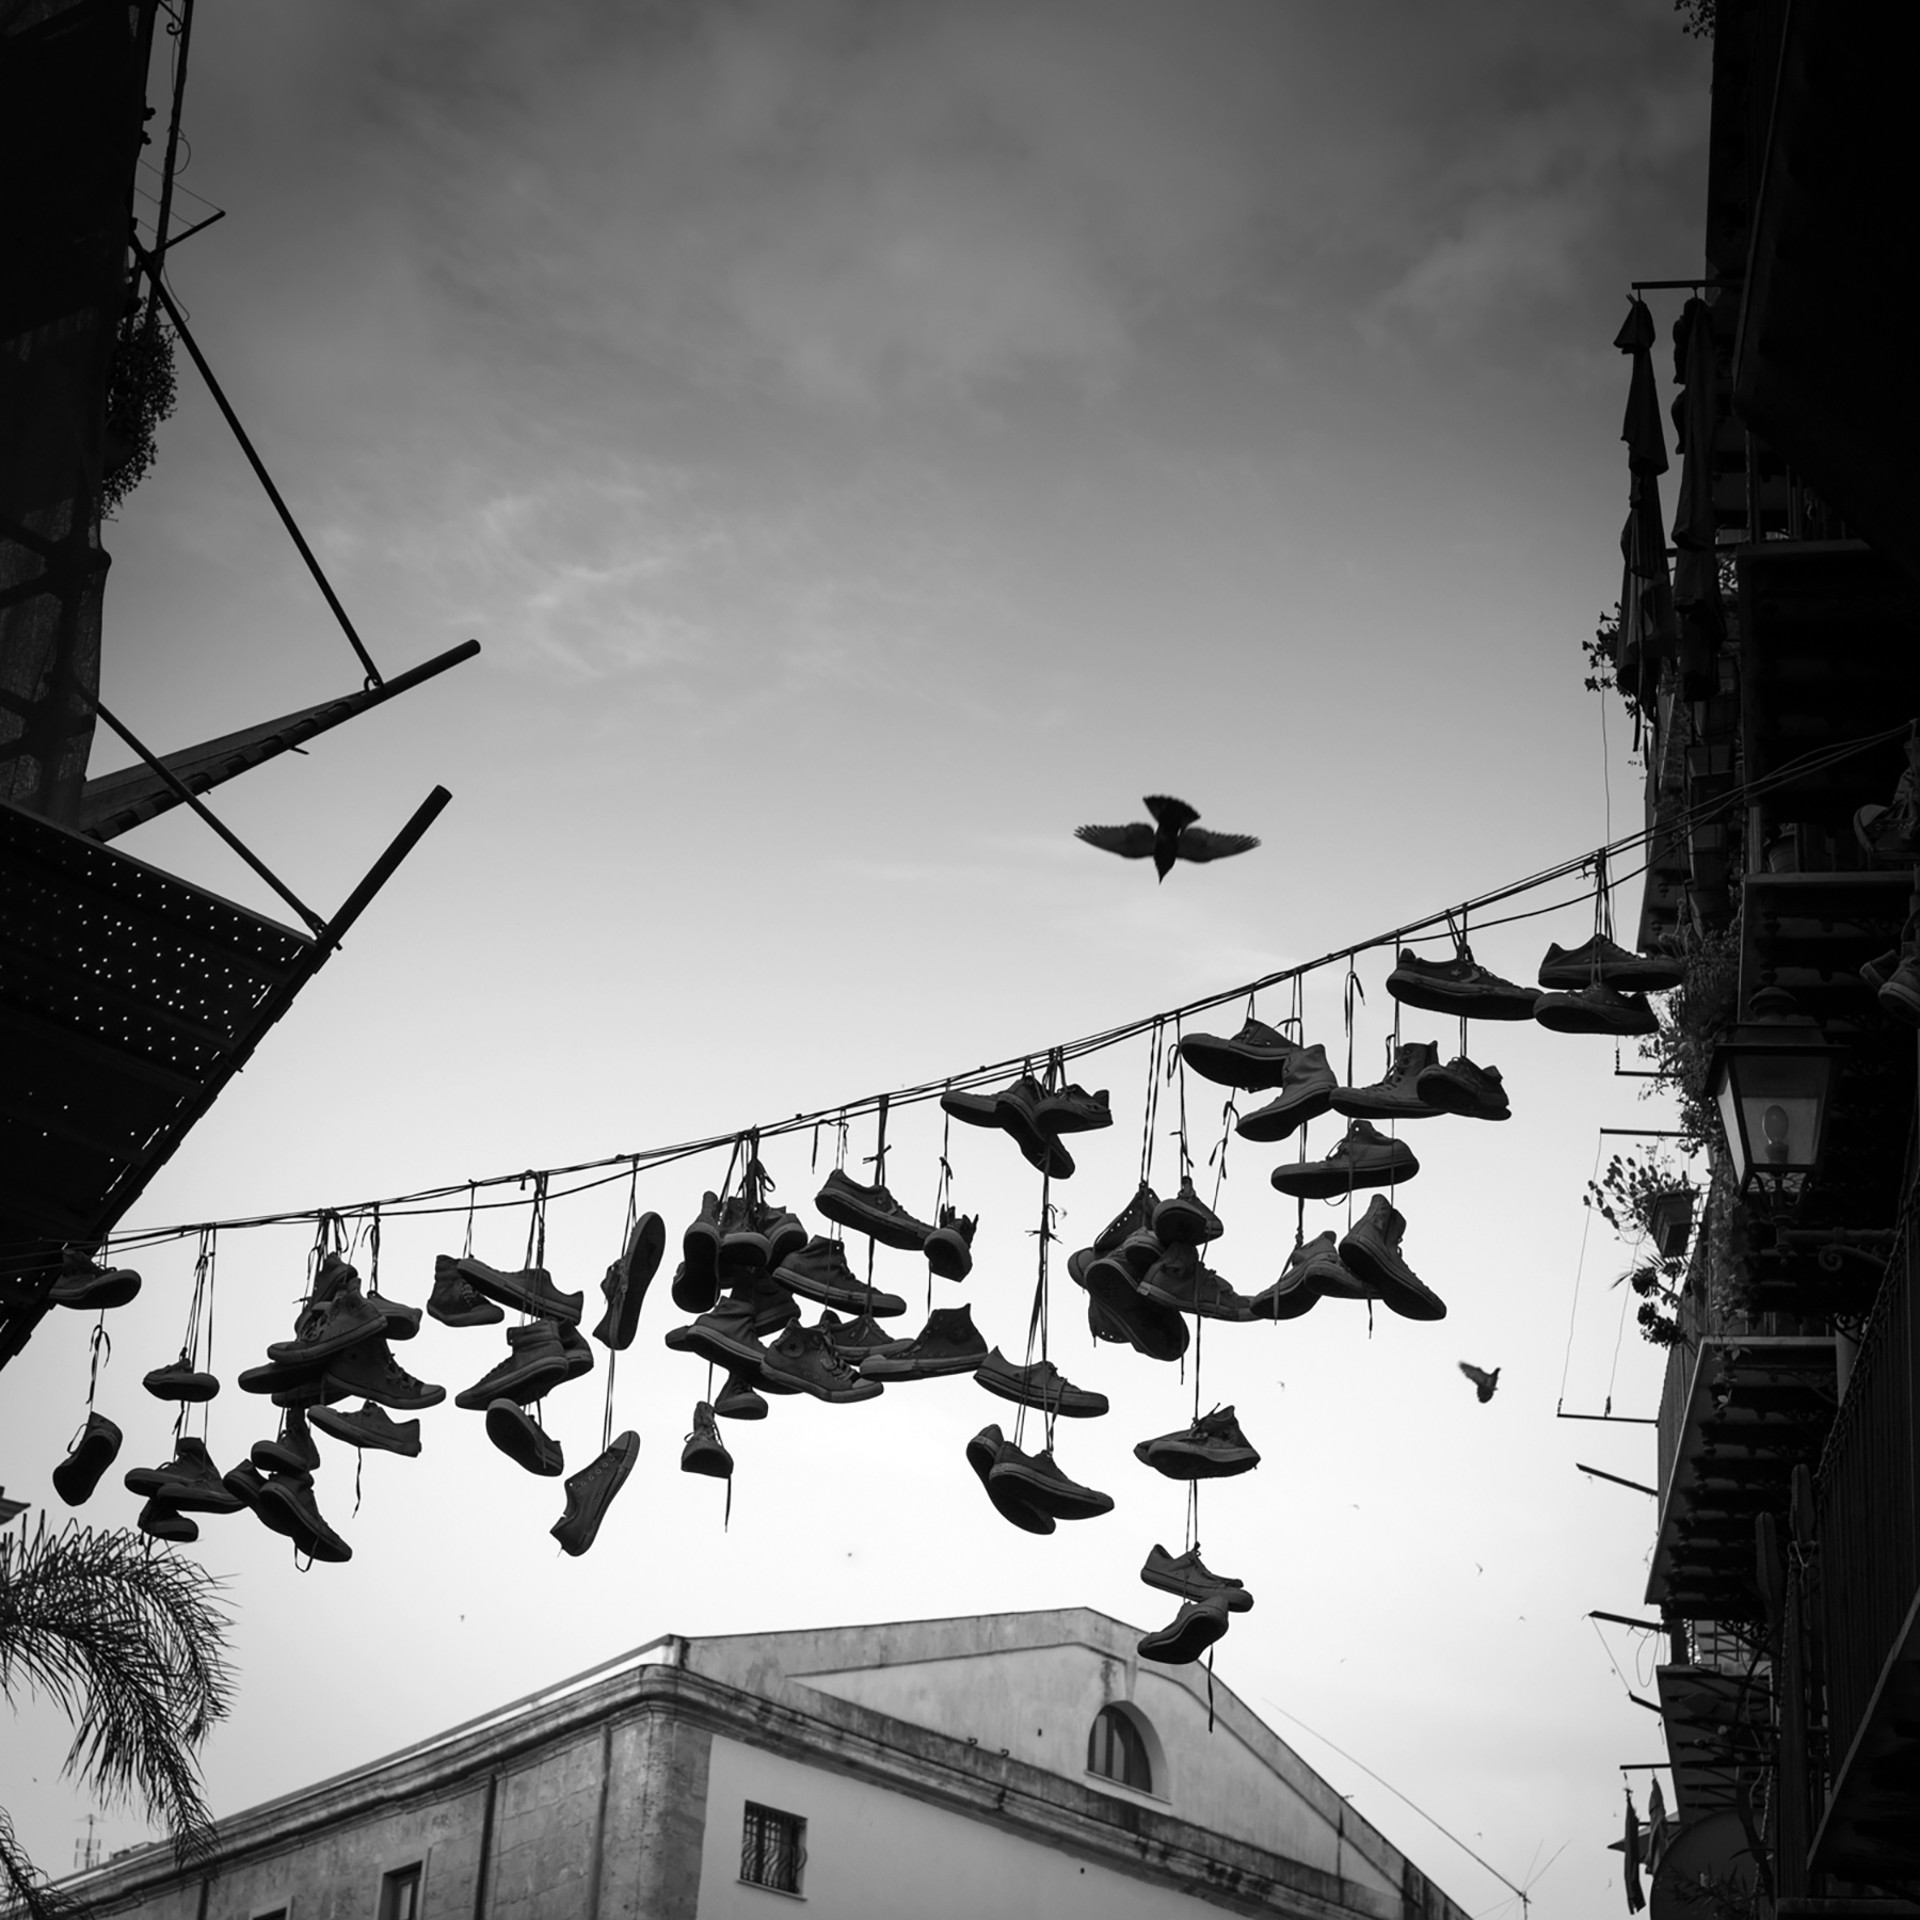 Shoes on Line - Palermo, Italy by Kevin Greenblat